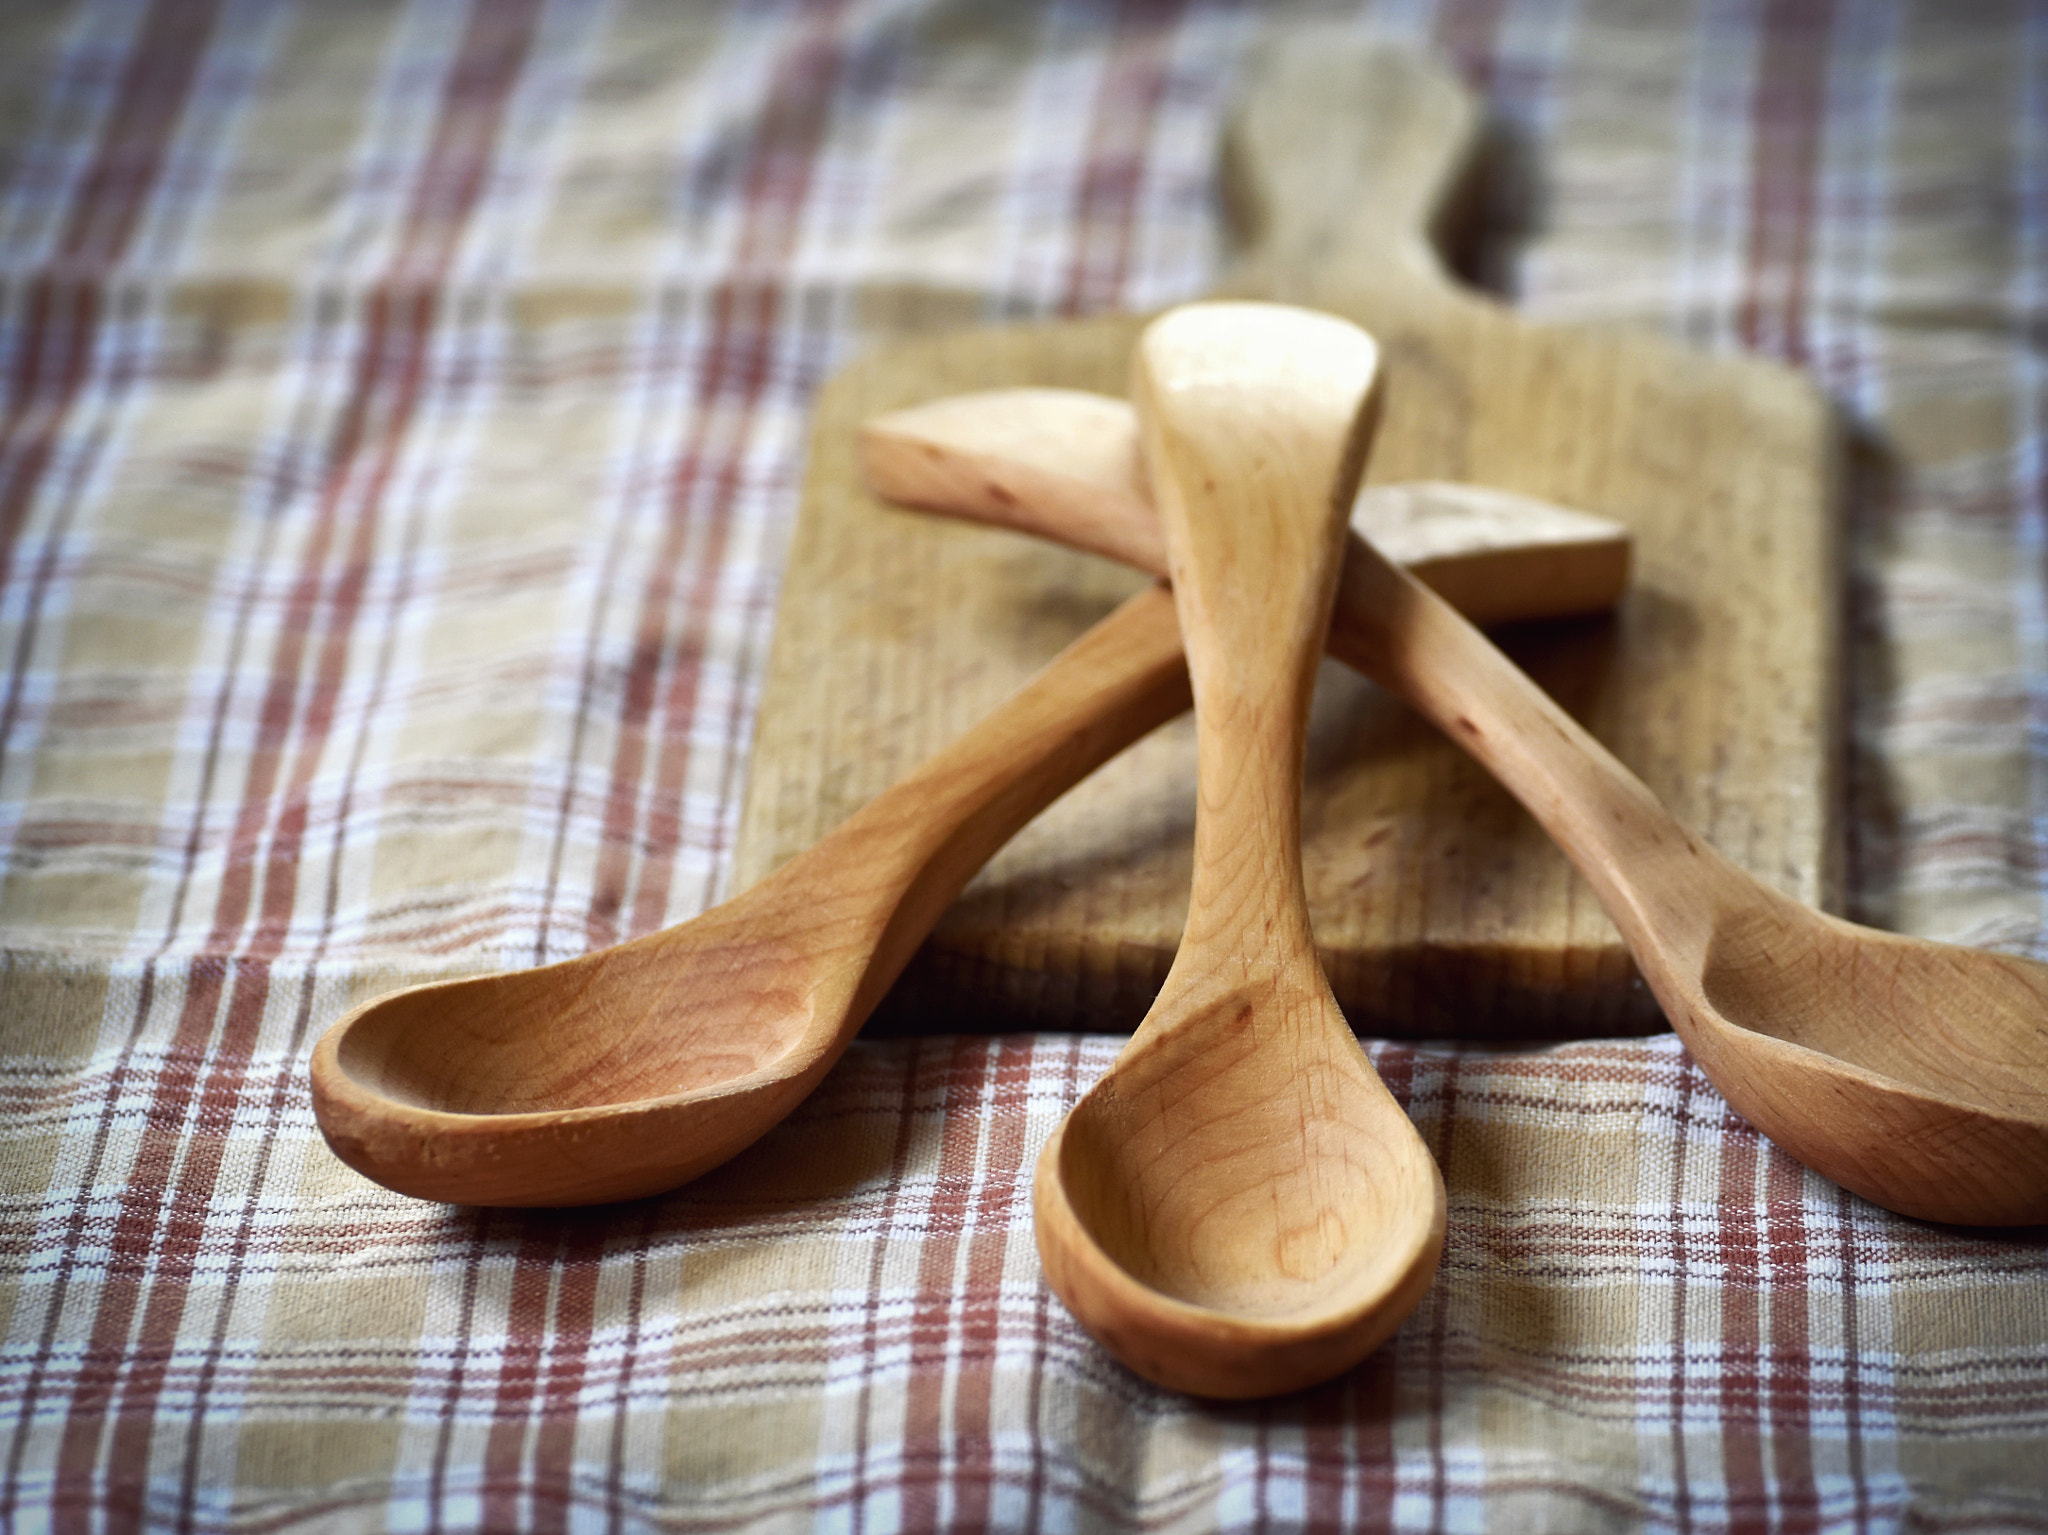 Nikon D5500 + Tamron SP 70-300mm F4-5.6 Di VC USD sample photo. Three traditional wooden spoon photography